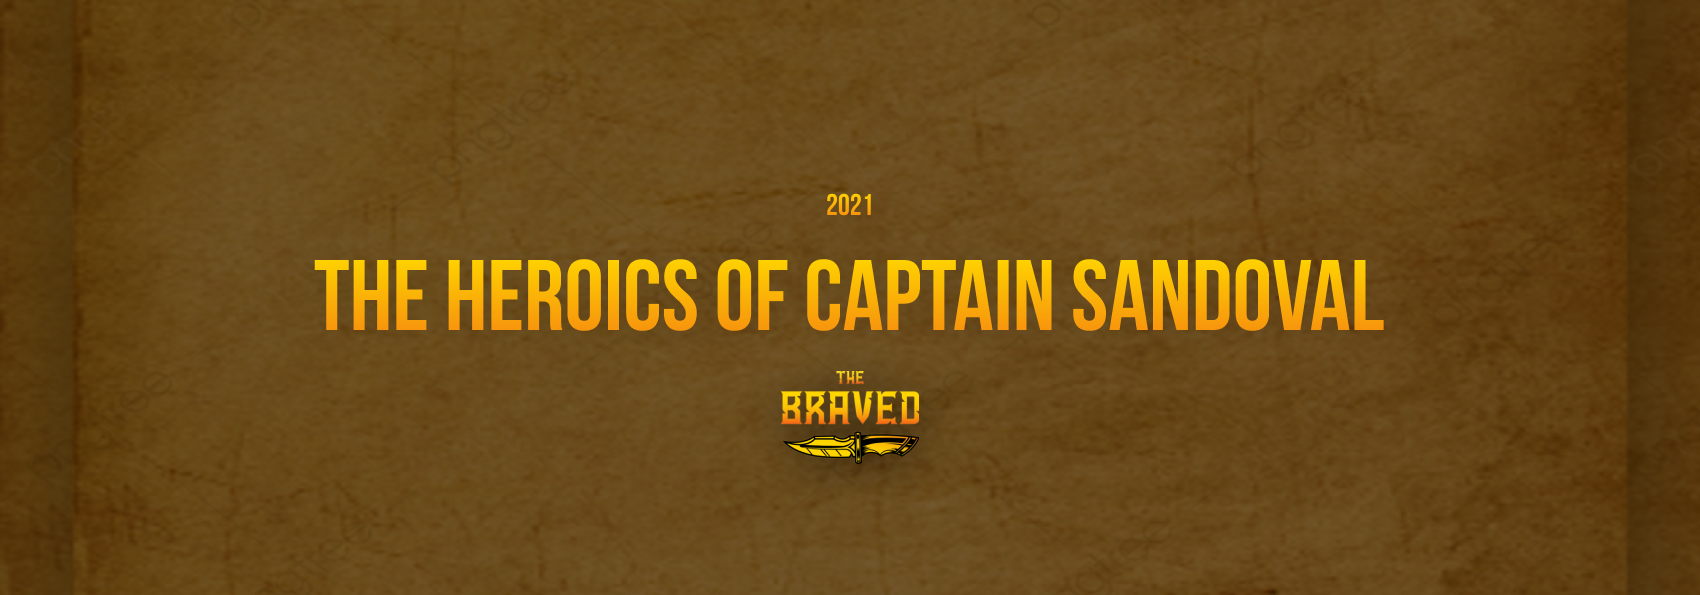 The Heroics of Captain Sandoval